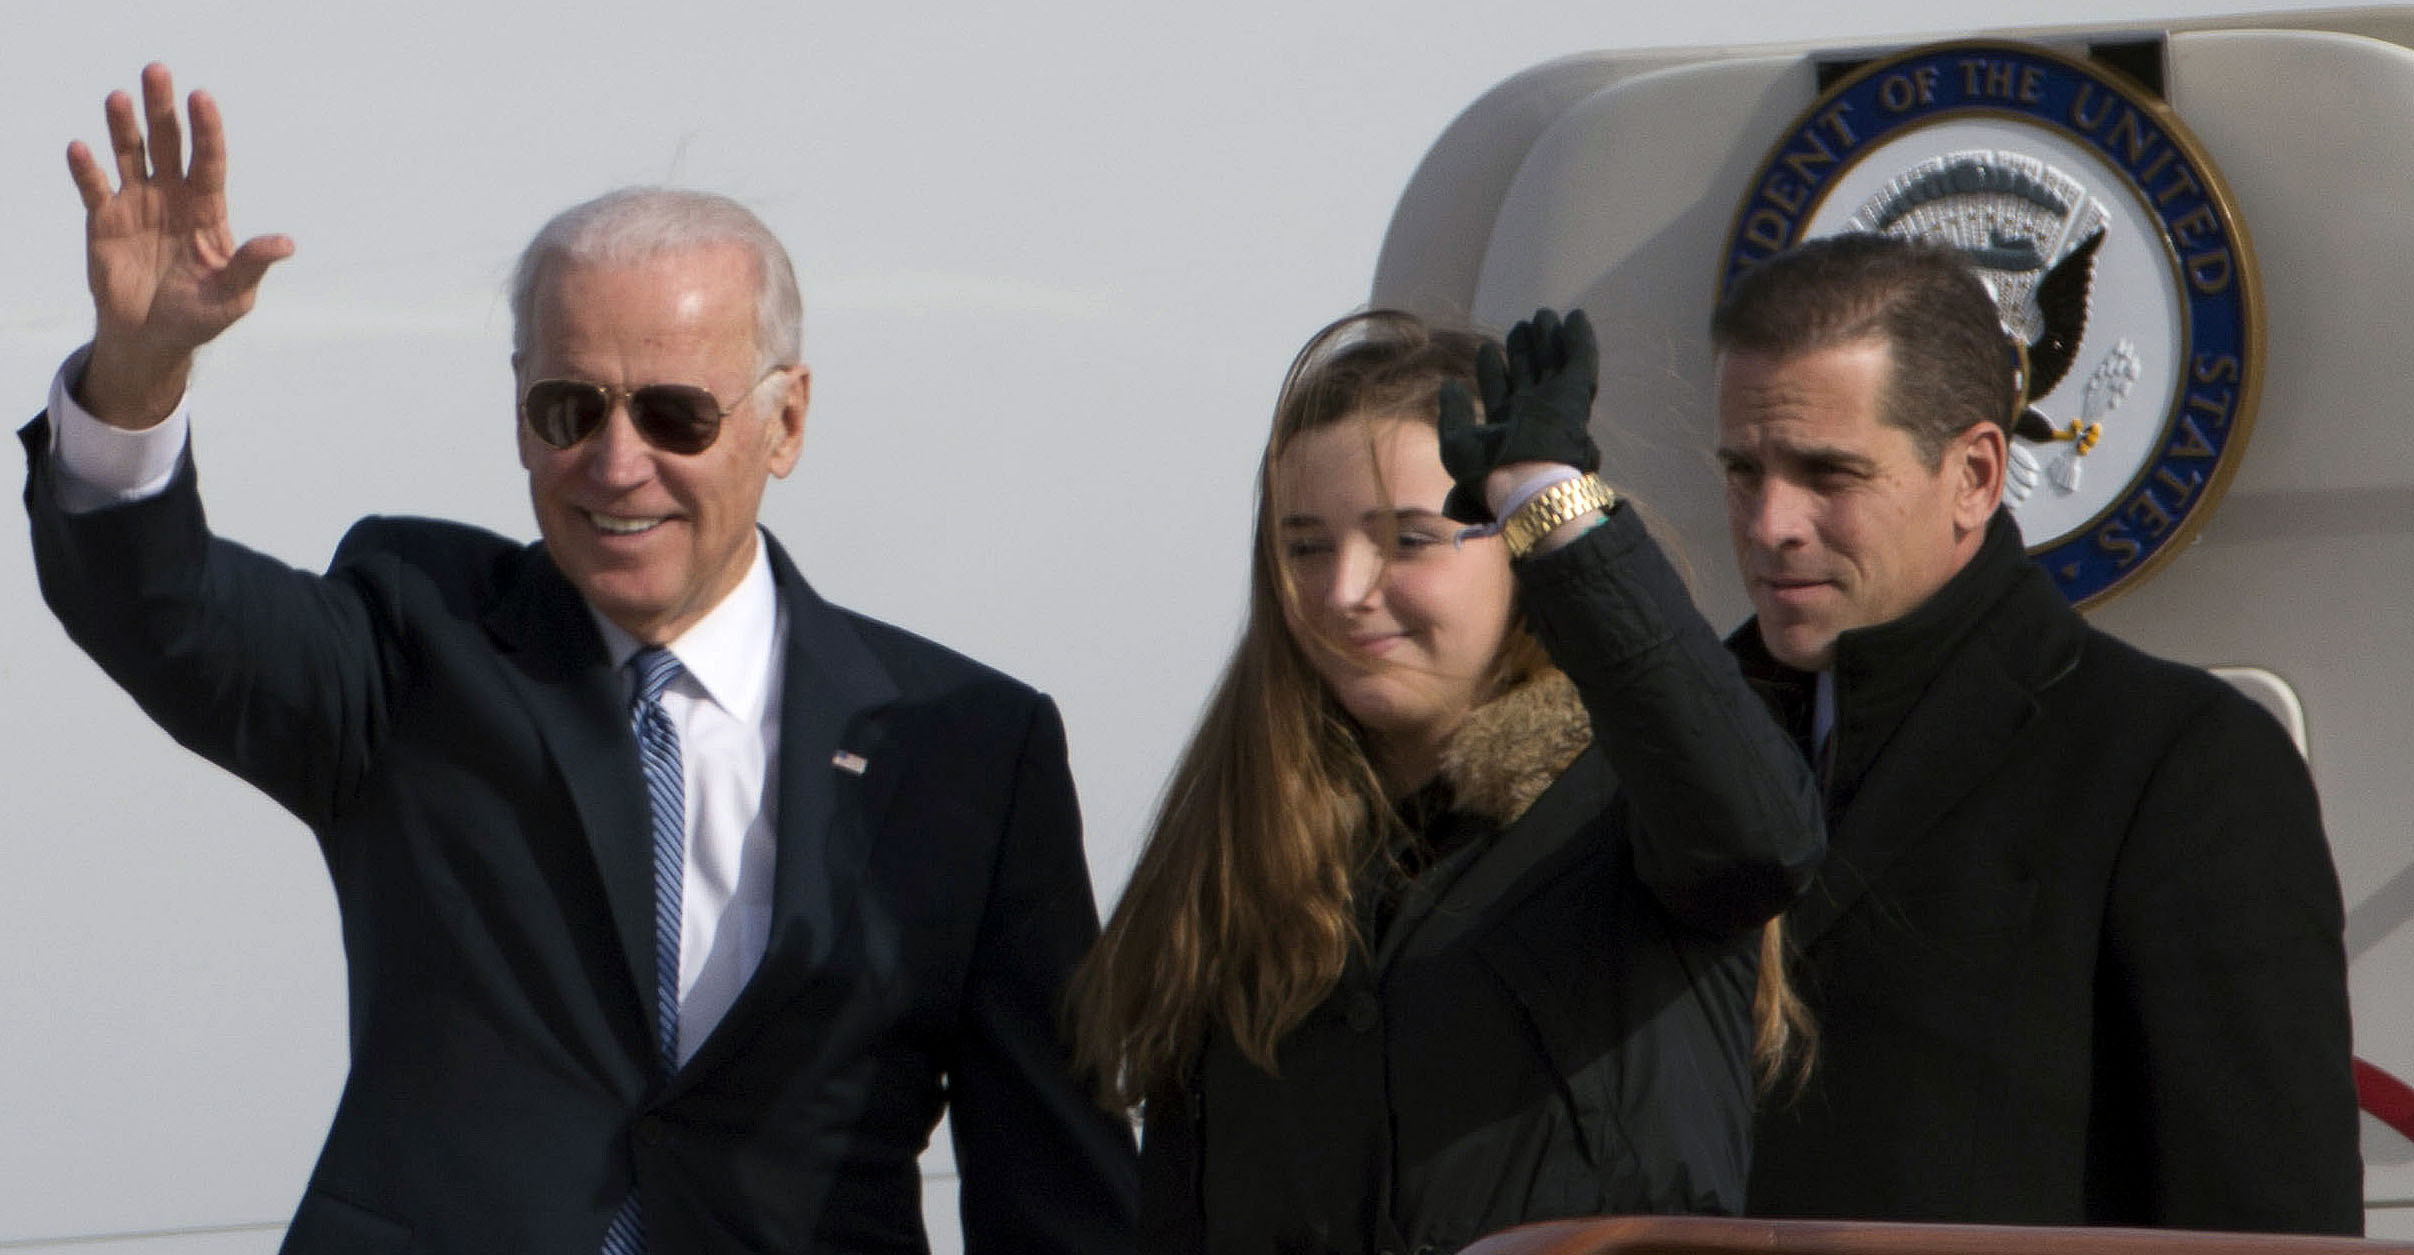 House Investigators Allege Biden 'Abused' Office in Hunter's Trips on Air Force 2